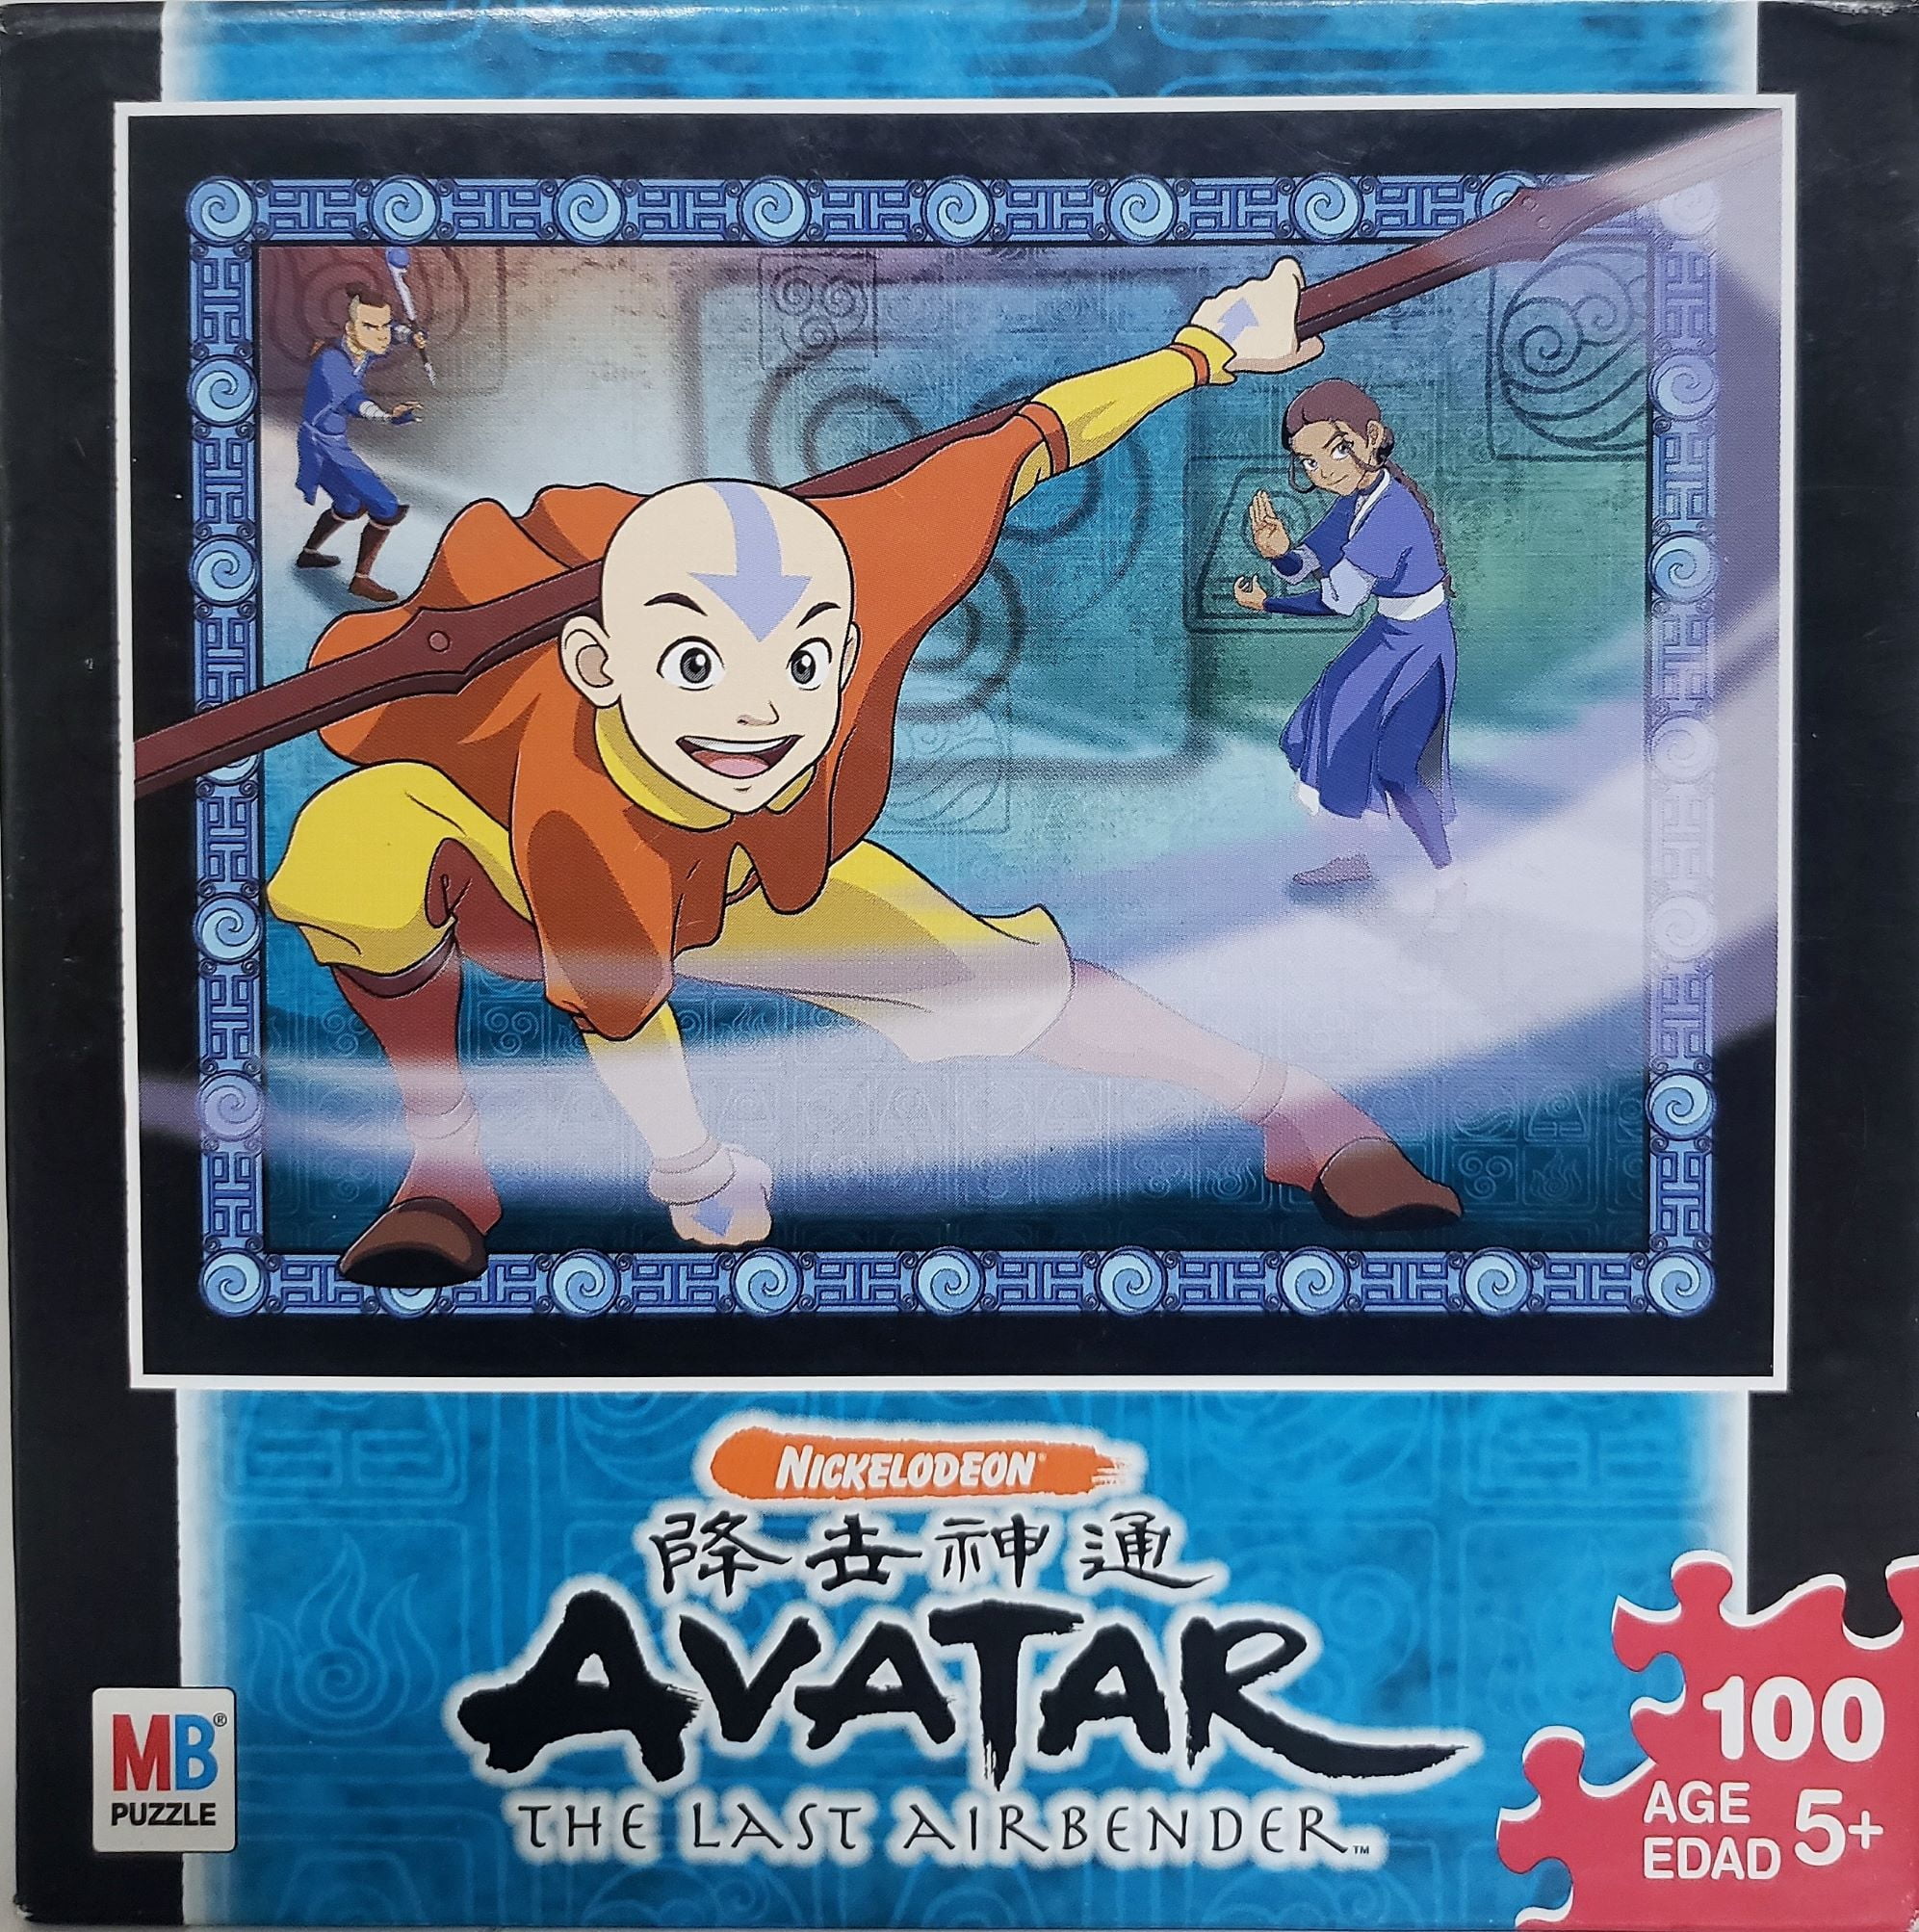 Avatar-The Last Airbender 500 Pieces Puzzles For Adults&Kids,Cartoon Patchwork Pattern Decompression Anime Jigsaw Puzzles,Funny Family Game Toy Home Decoration1000pcs 